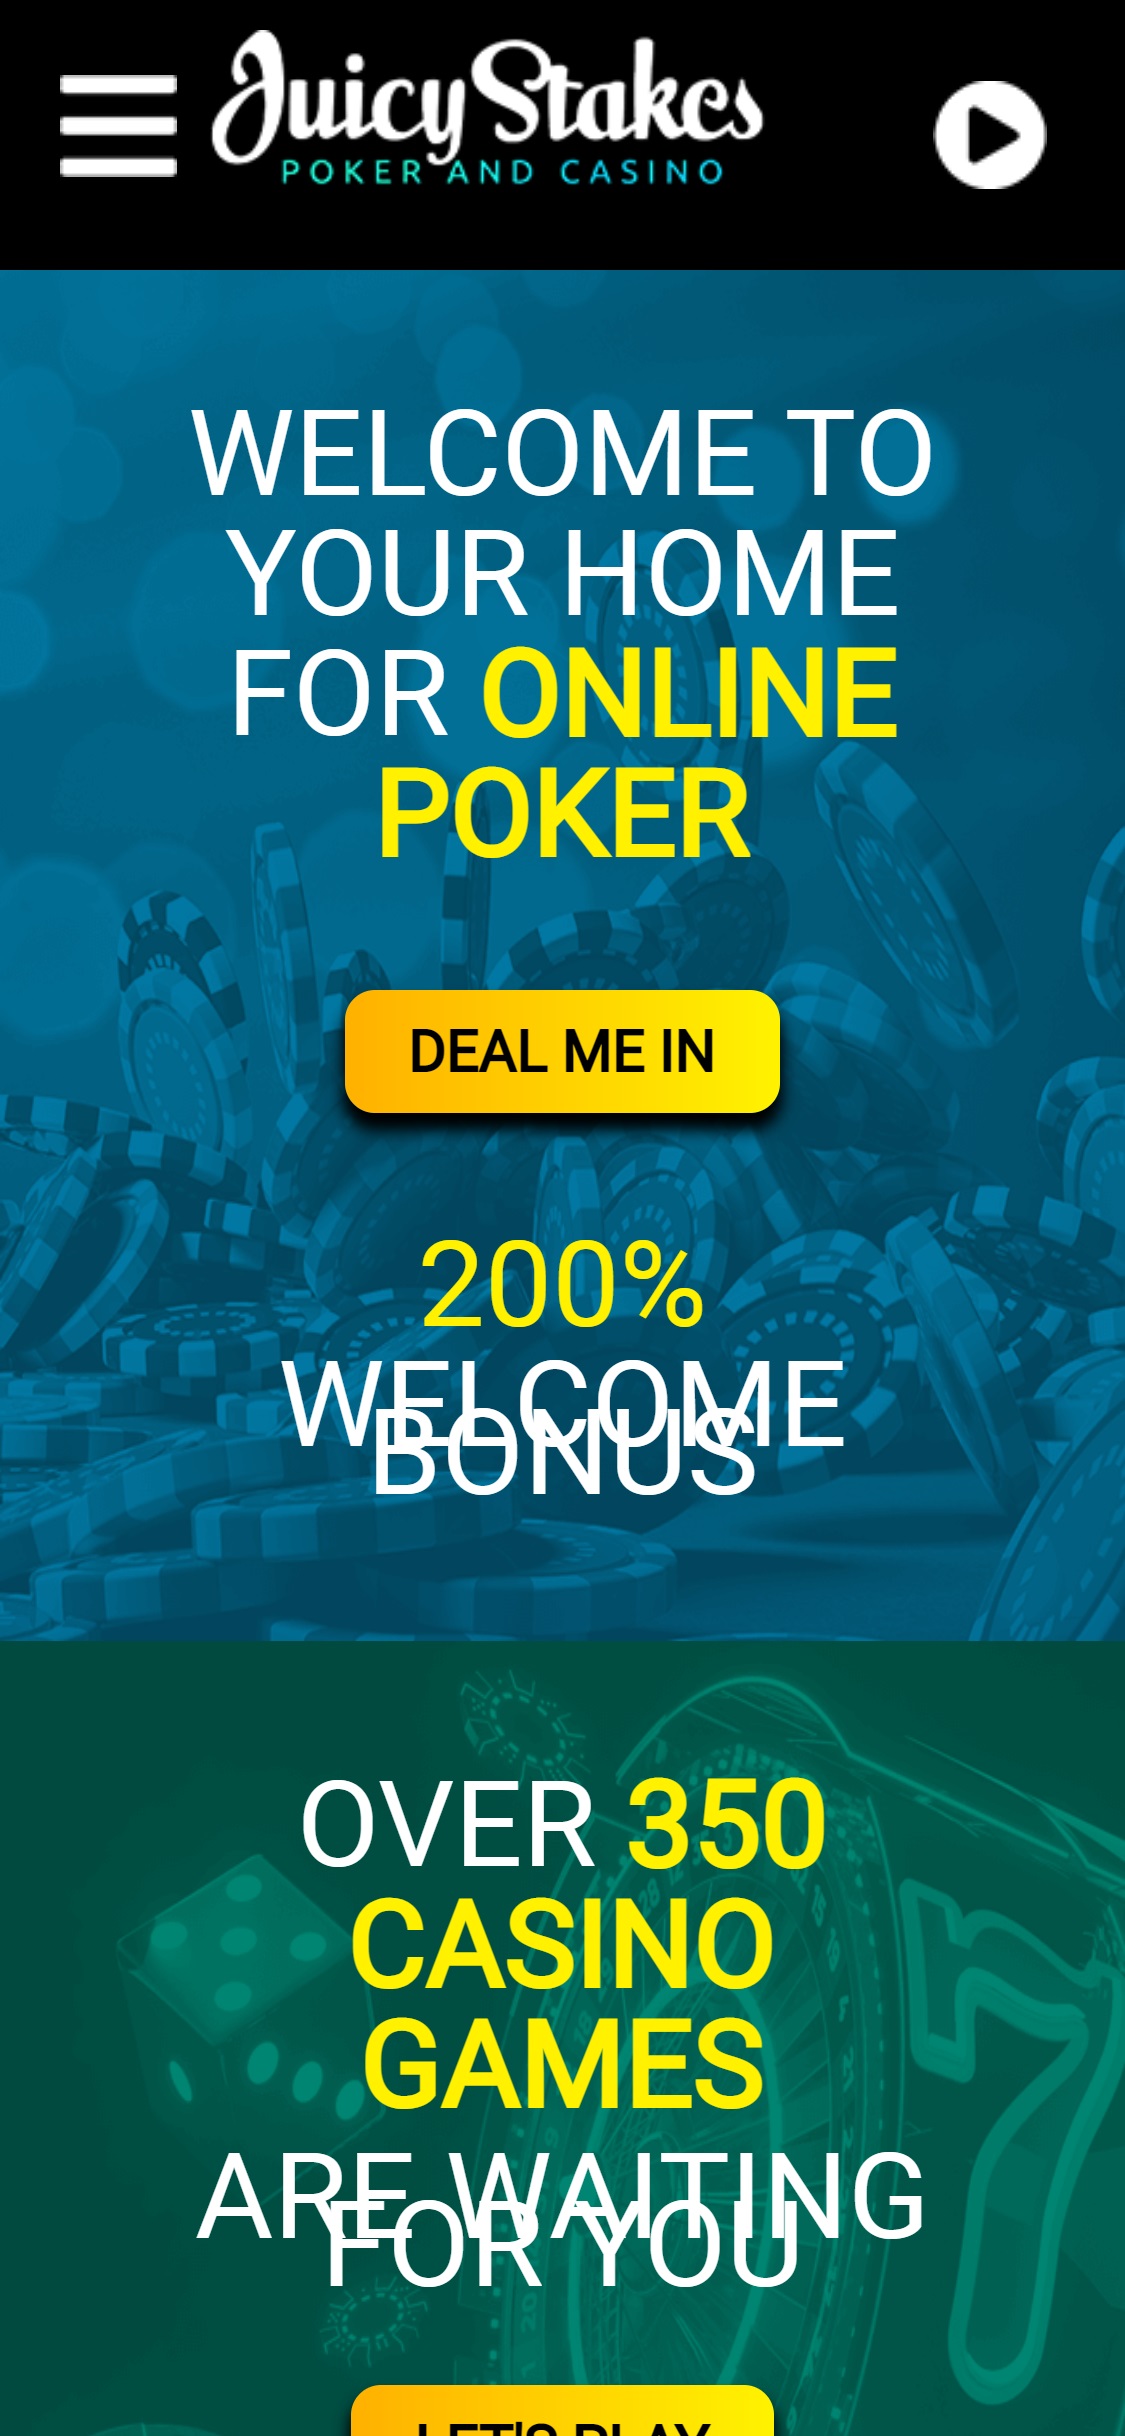 Juicy Stakes Casino Mobile Review